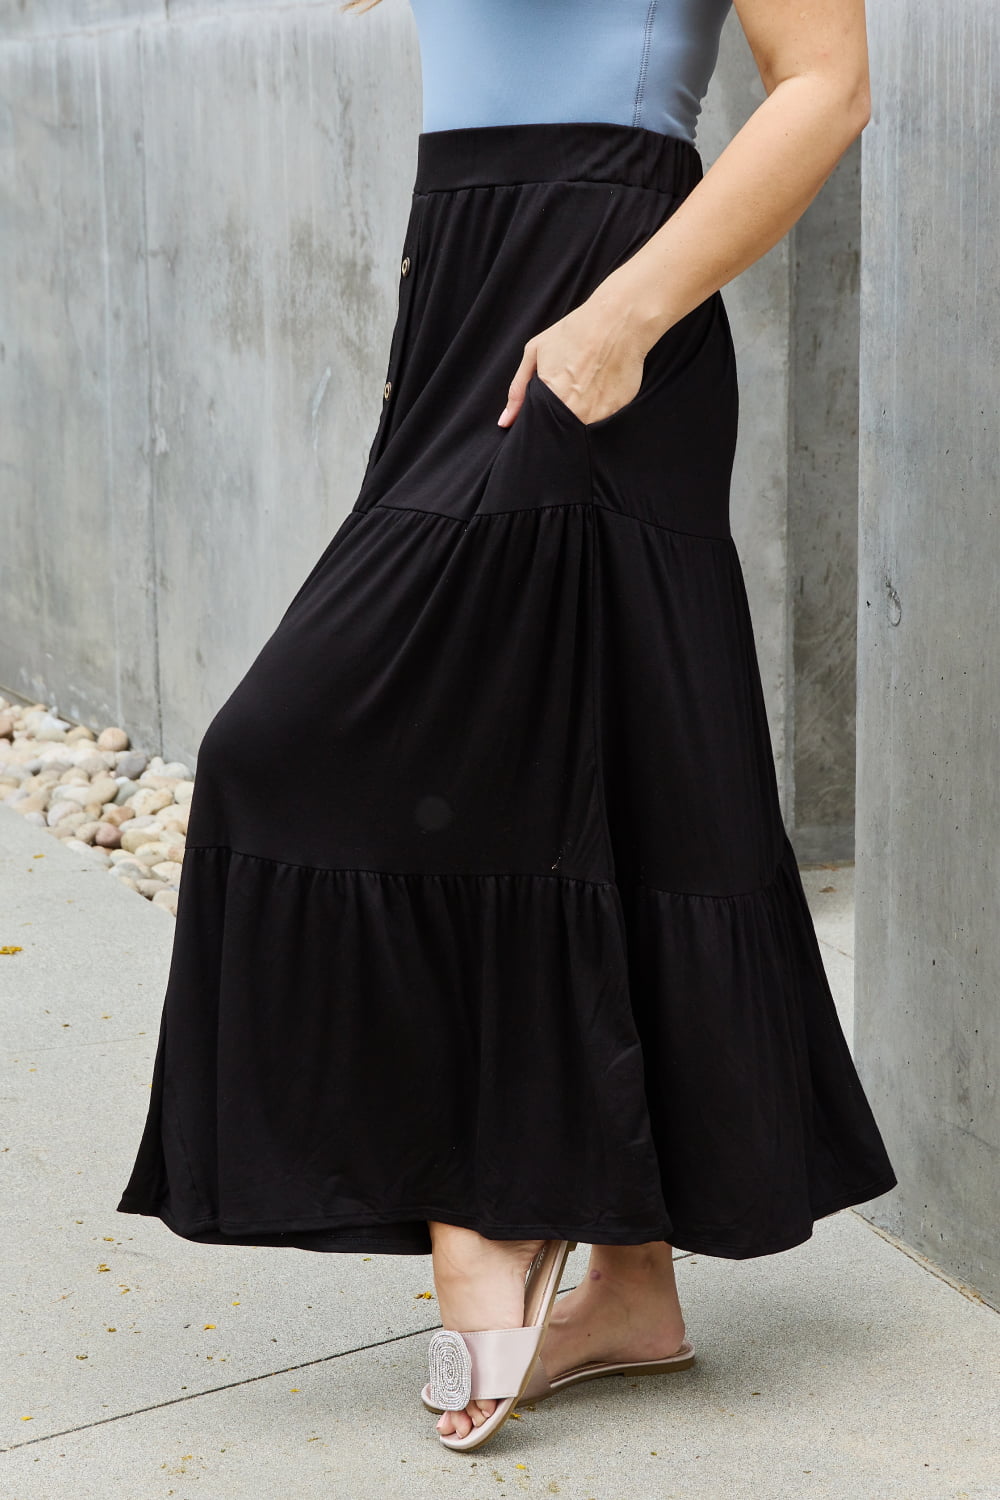 Side detail - Sister Missionary modest maxi skirt from Nauvoo Supply Co